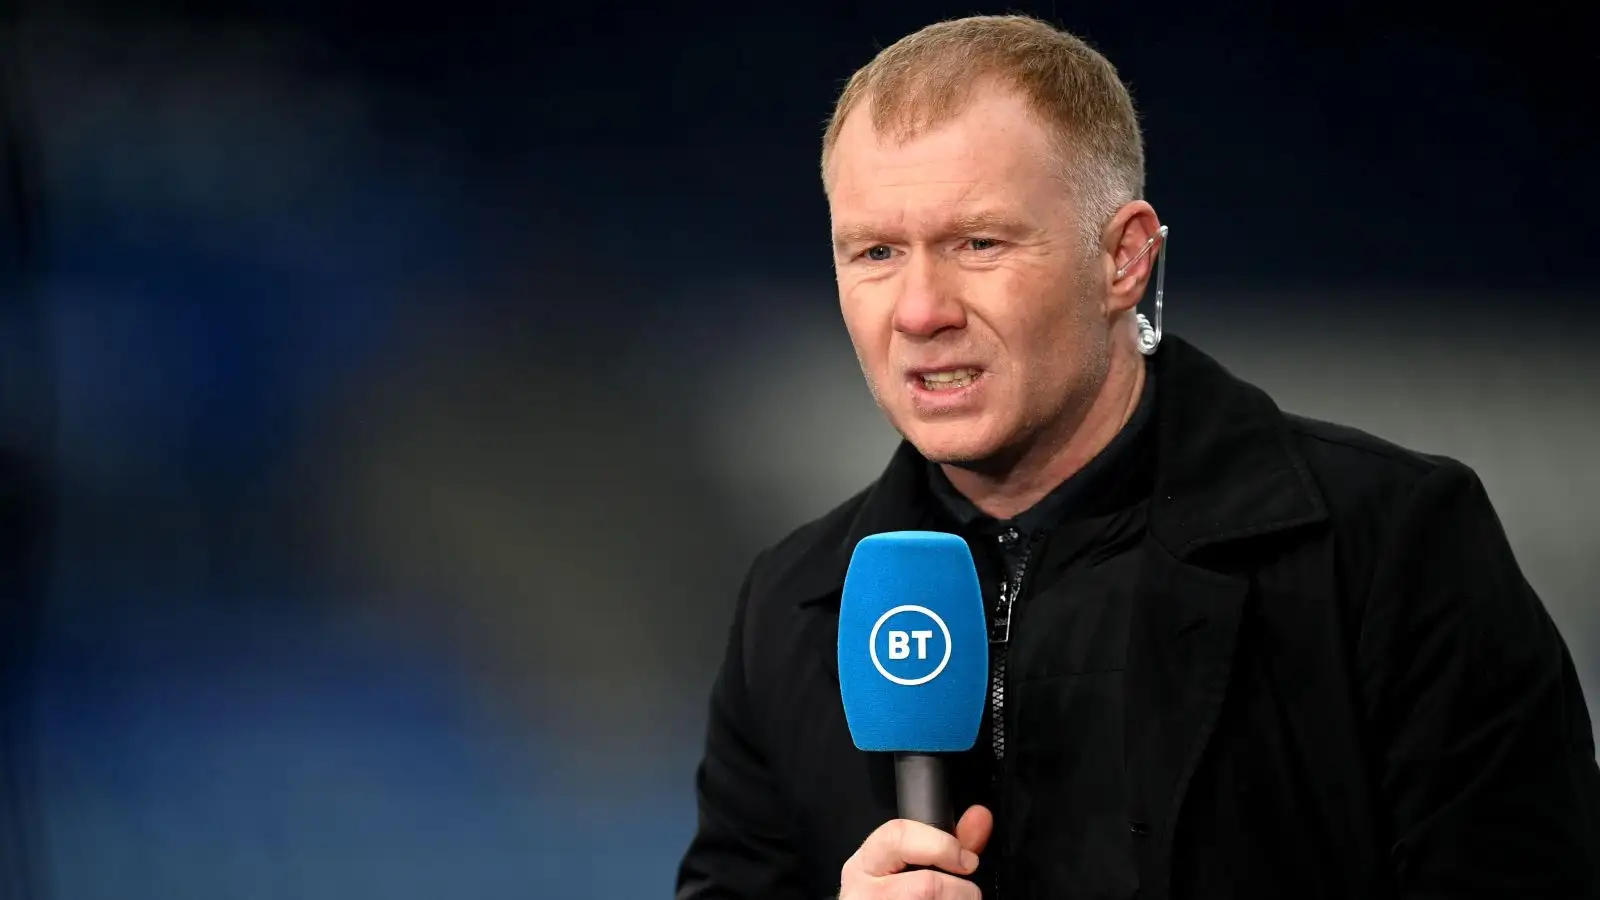 Scholes takes swipe at two Man Utd players after Wenger criticism of City defeat